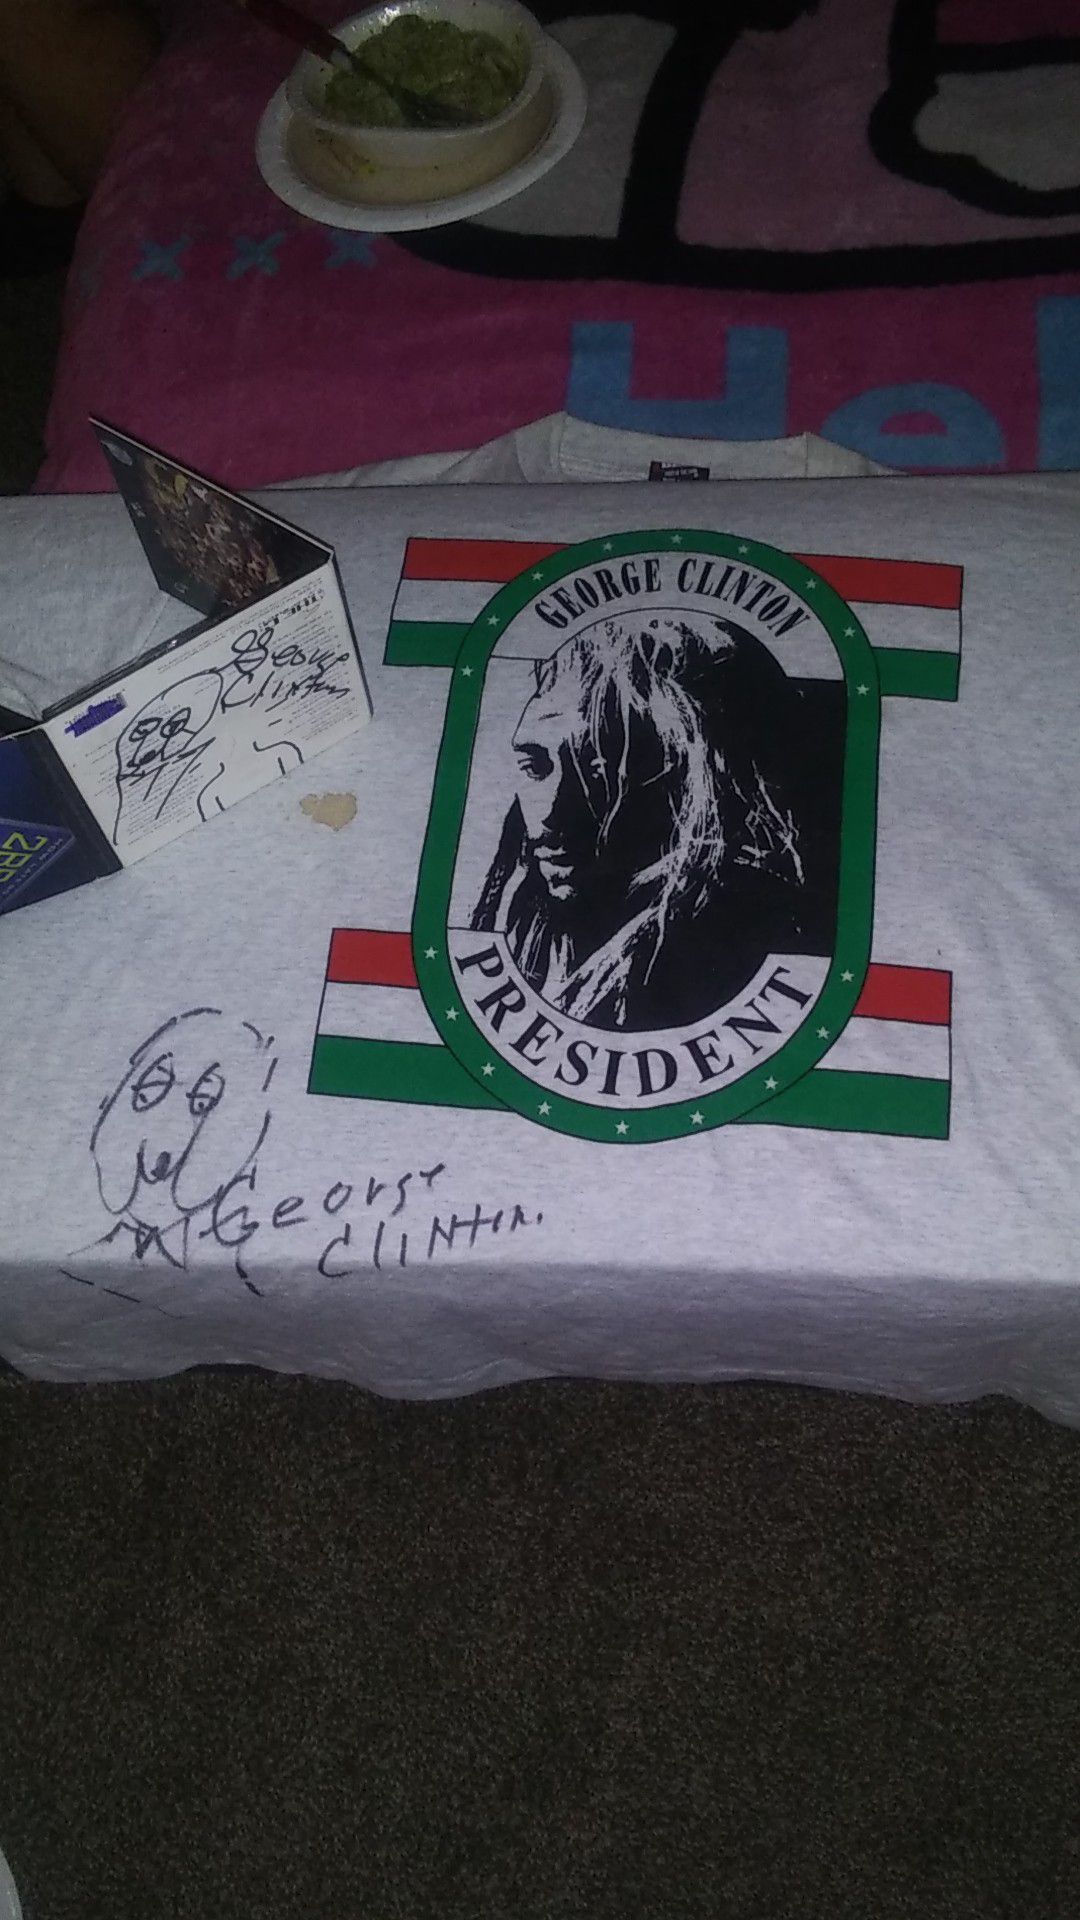 George Clinton autographed CD and t-shirt